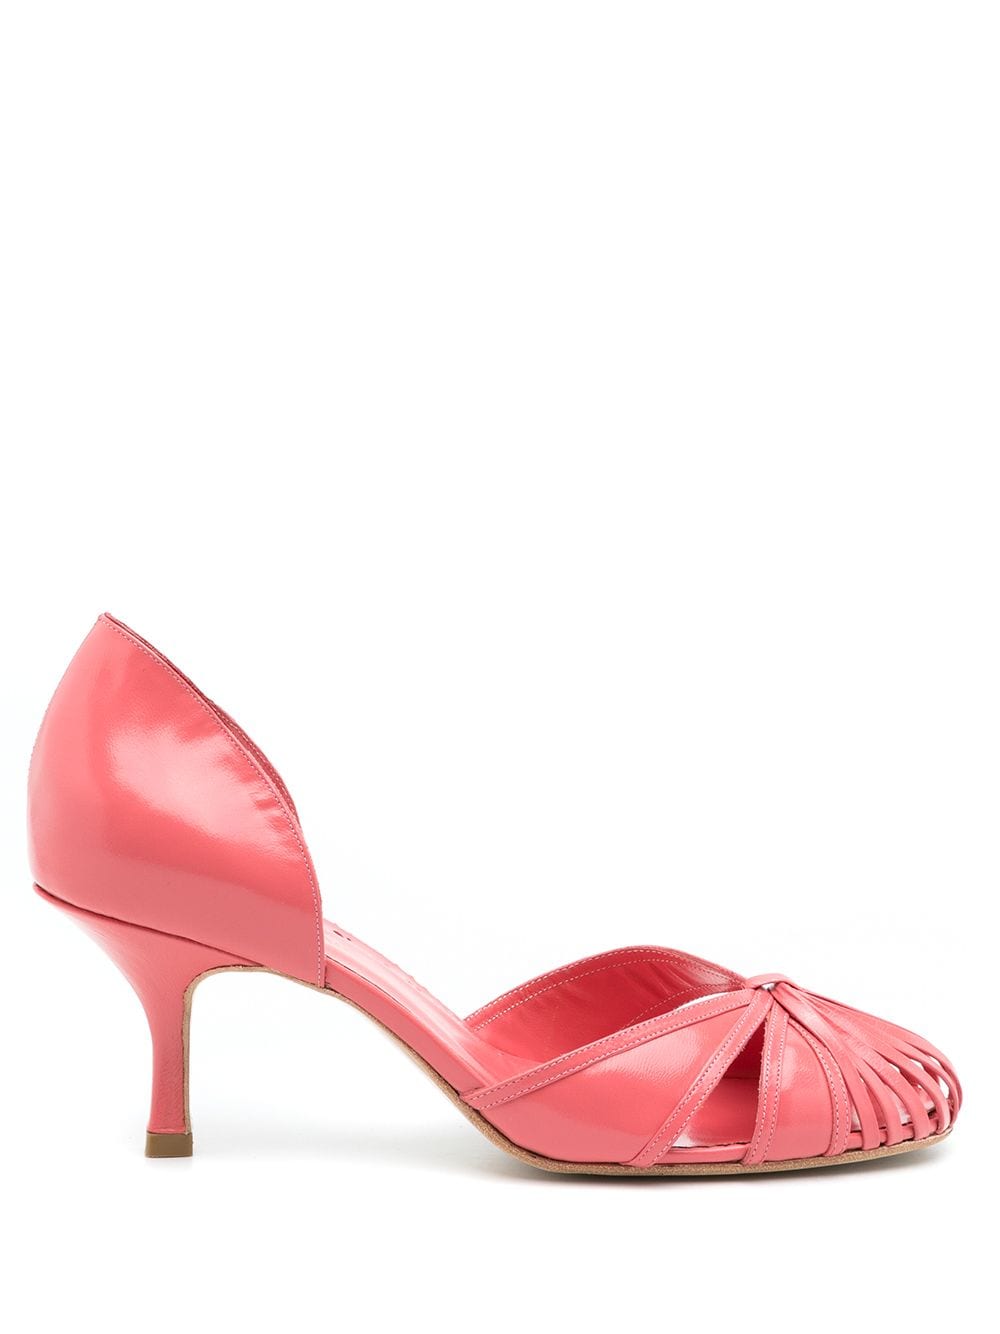 Sarah Chofakian Cut-out Detail Pumps In Pink